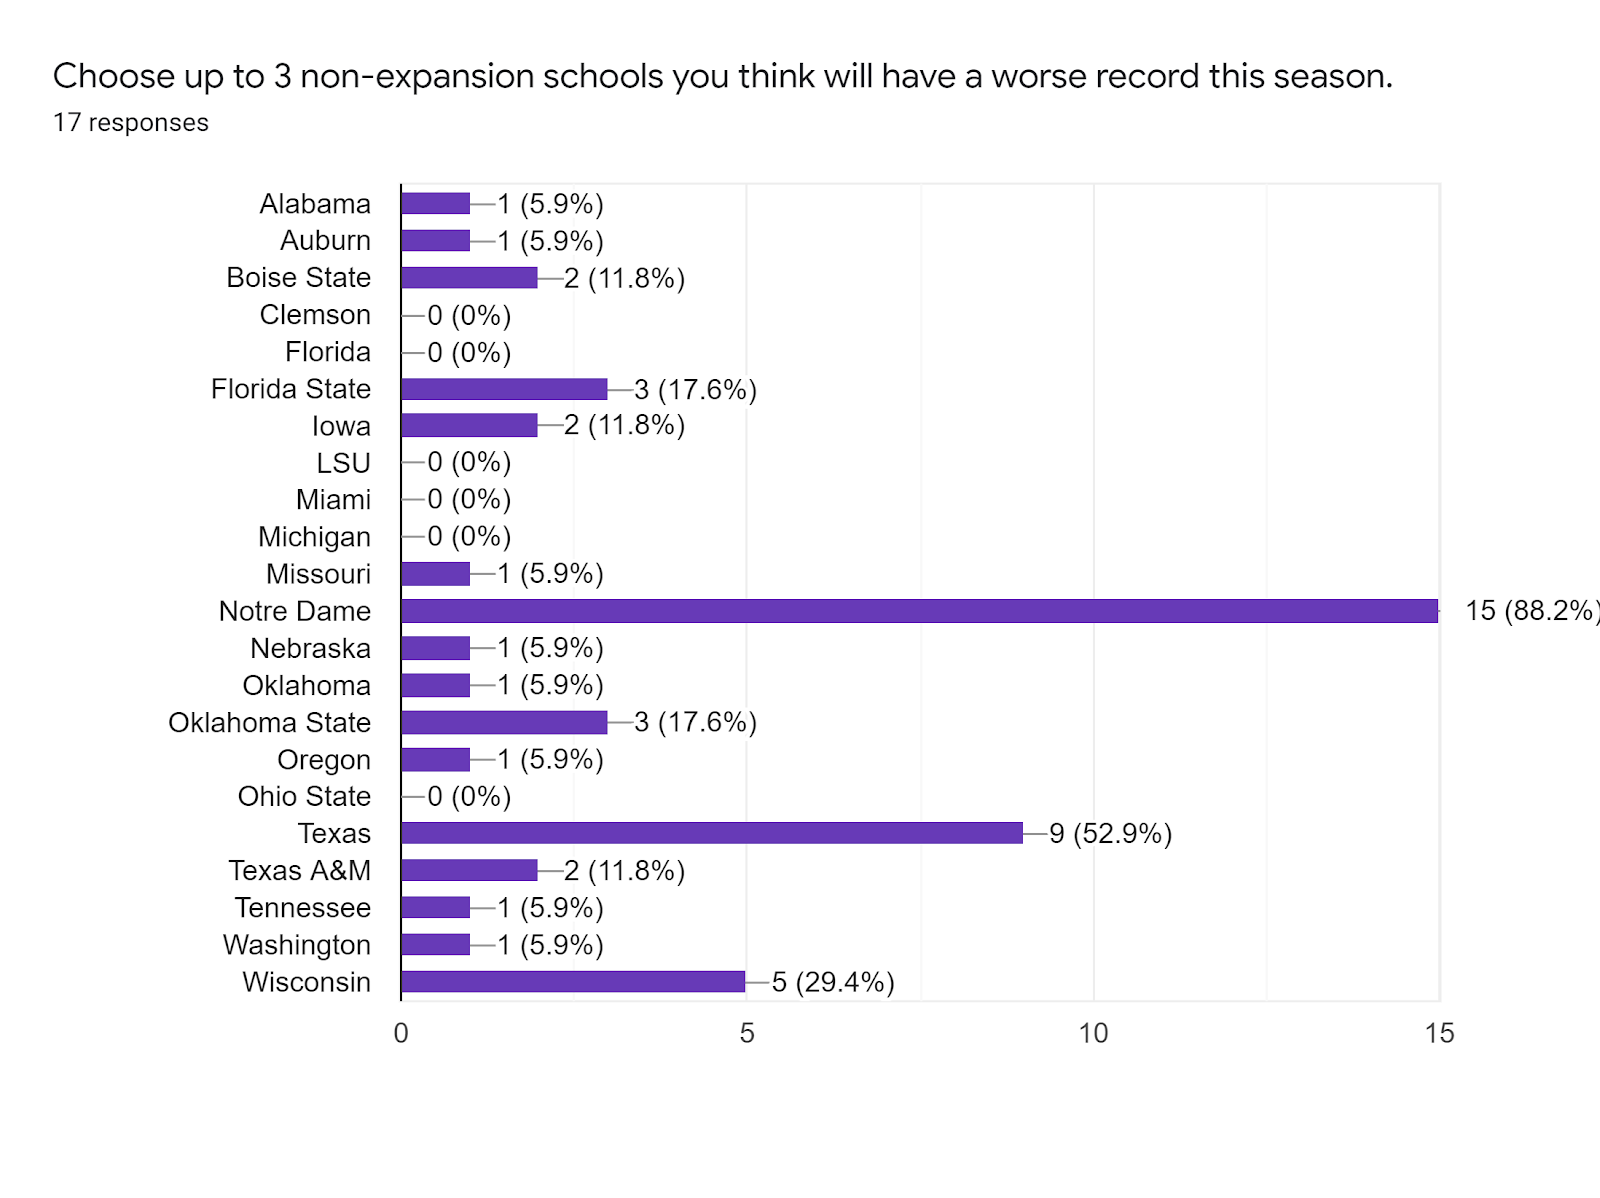 Forms response chart. Question title: Choose up to 3 non-expansion schools you think will have a worse record this season.. Number of responses: 17 responses.